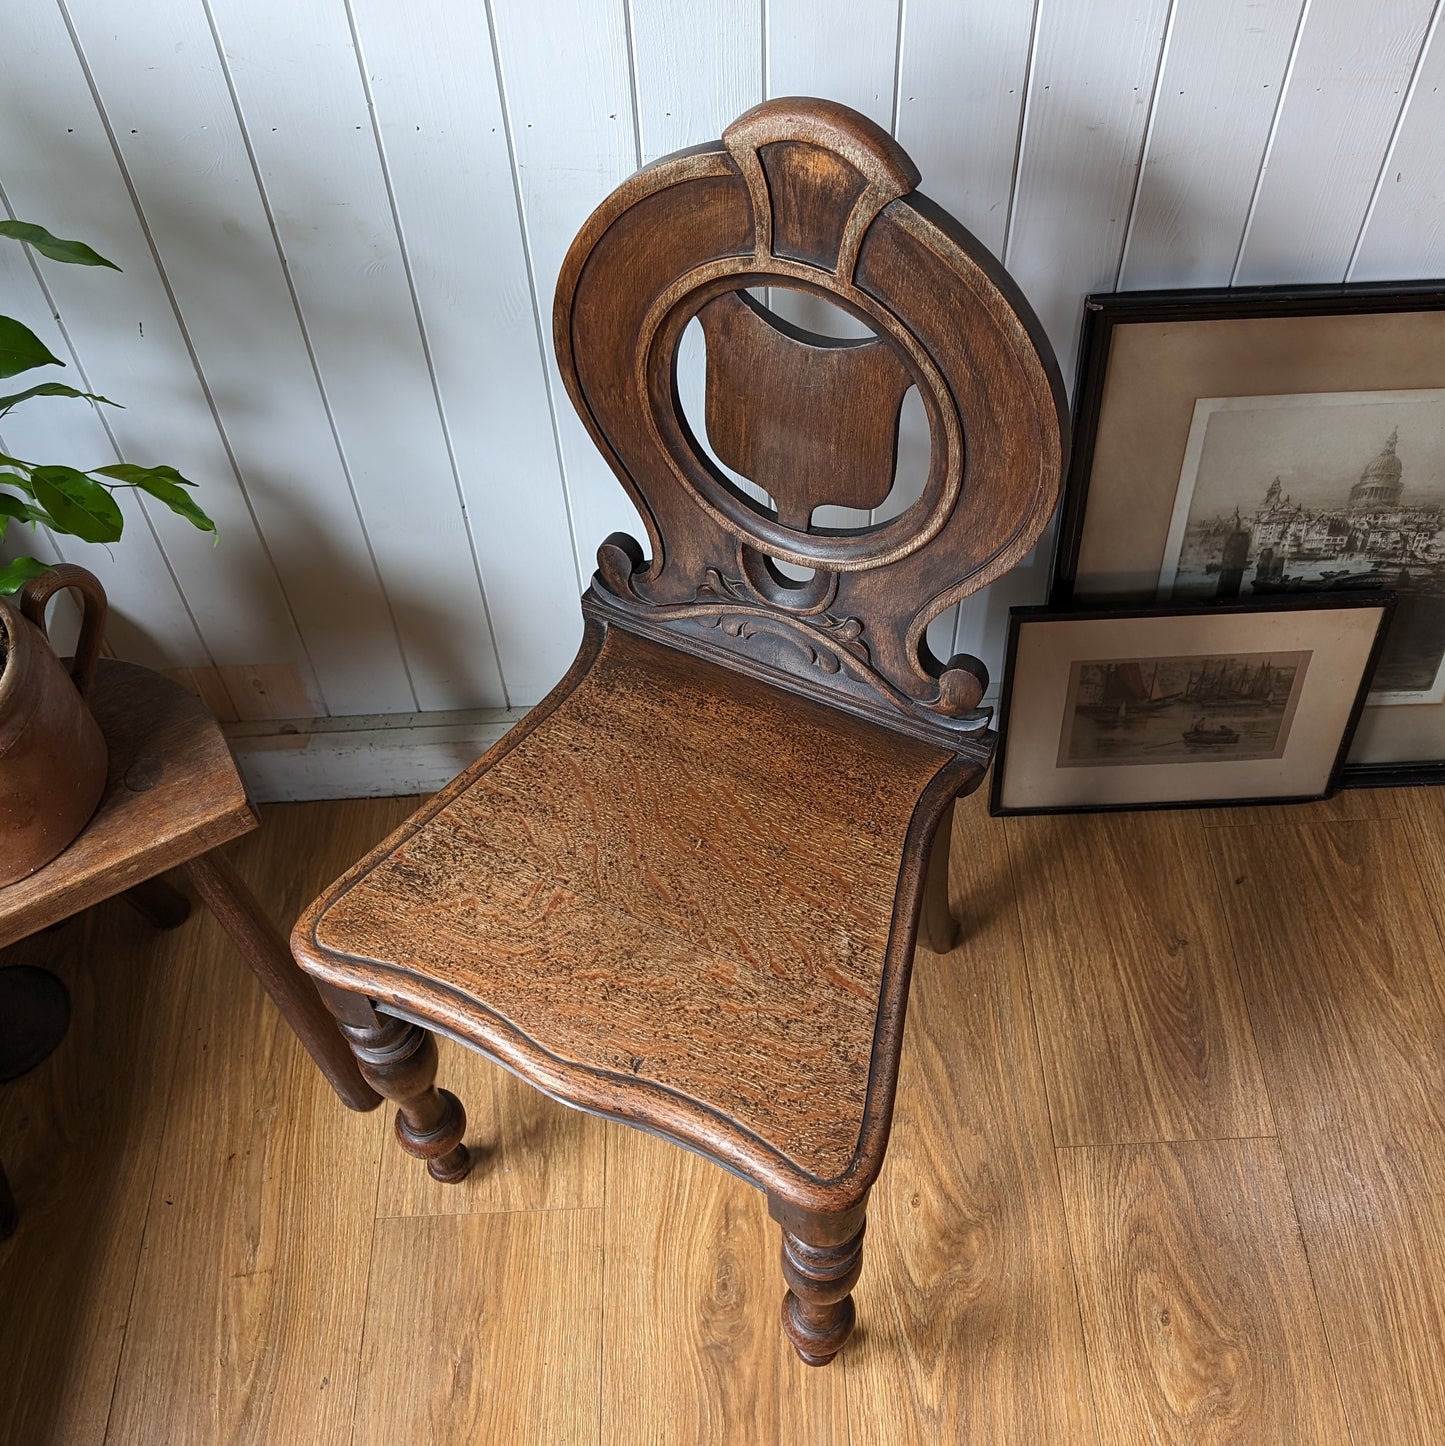 Antique Shield Back Hall Chair